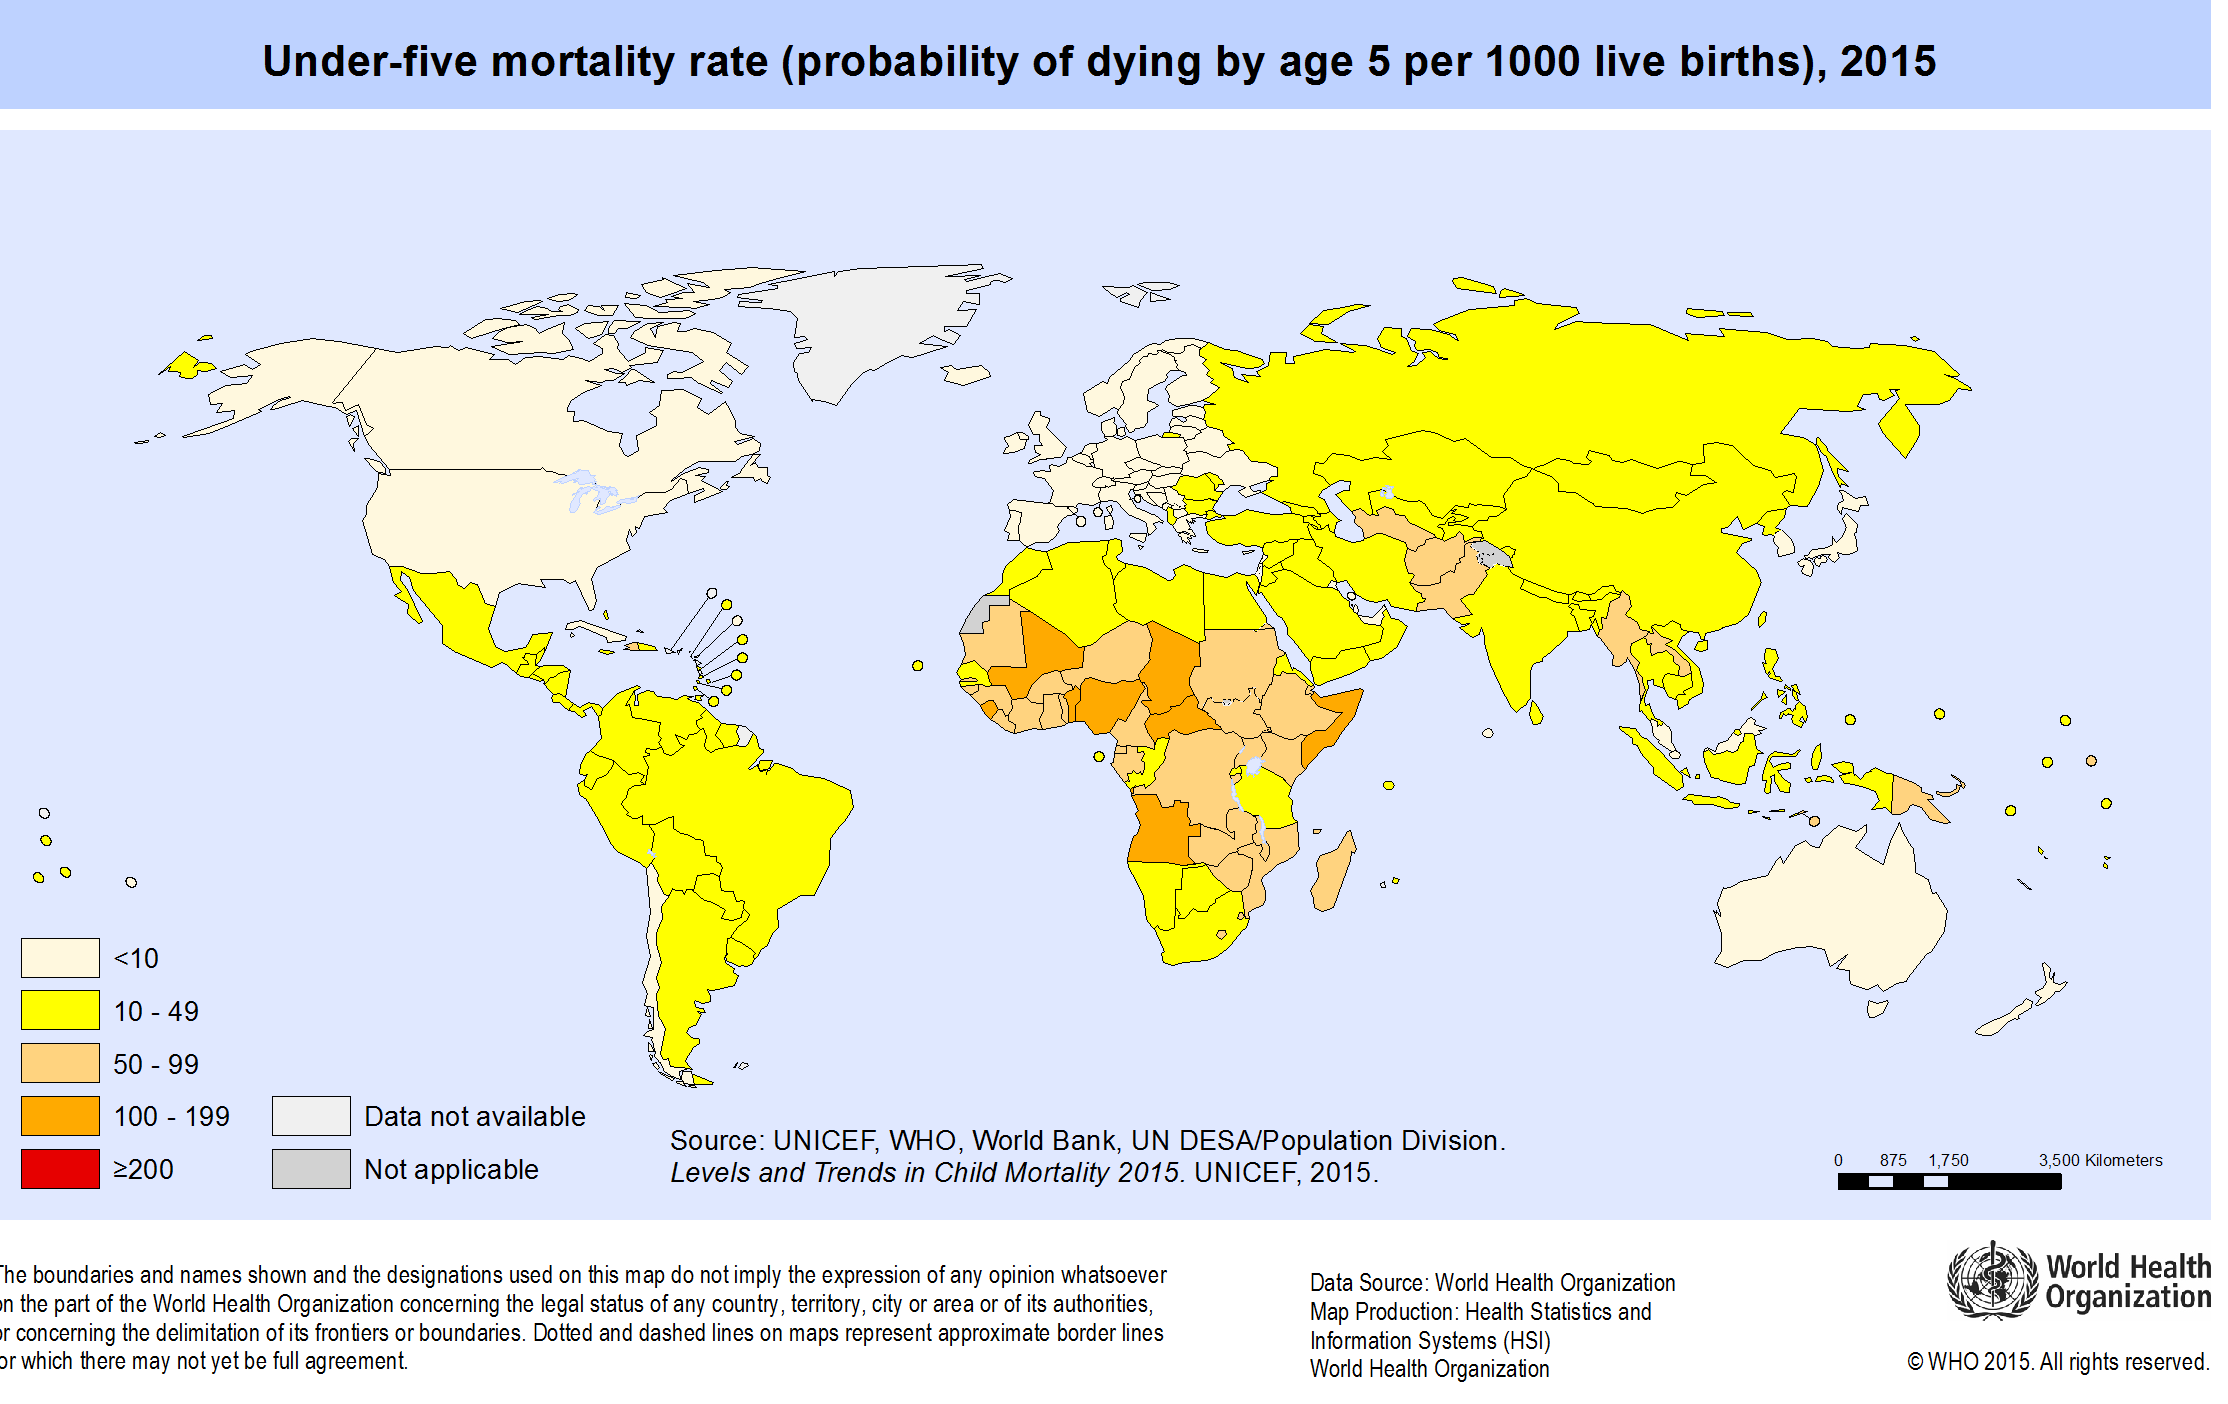 World Map of under-five mortality, 2015